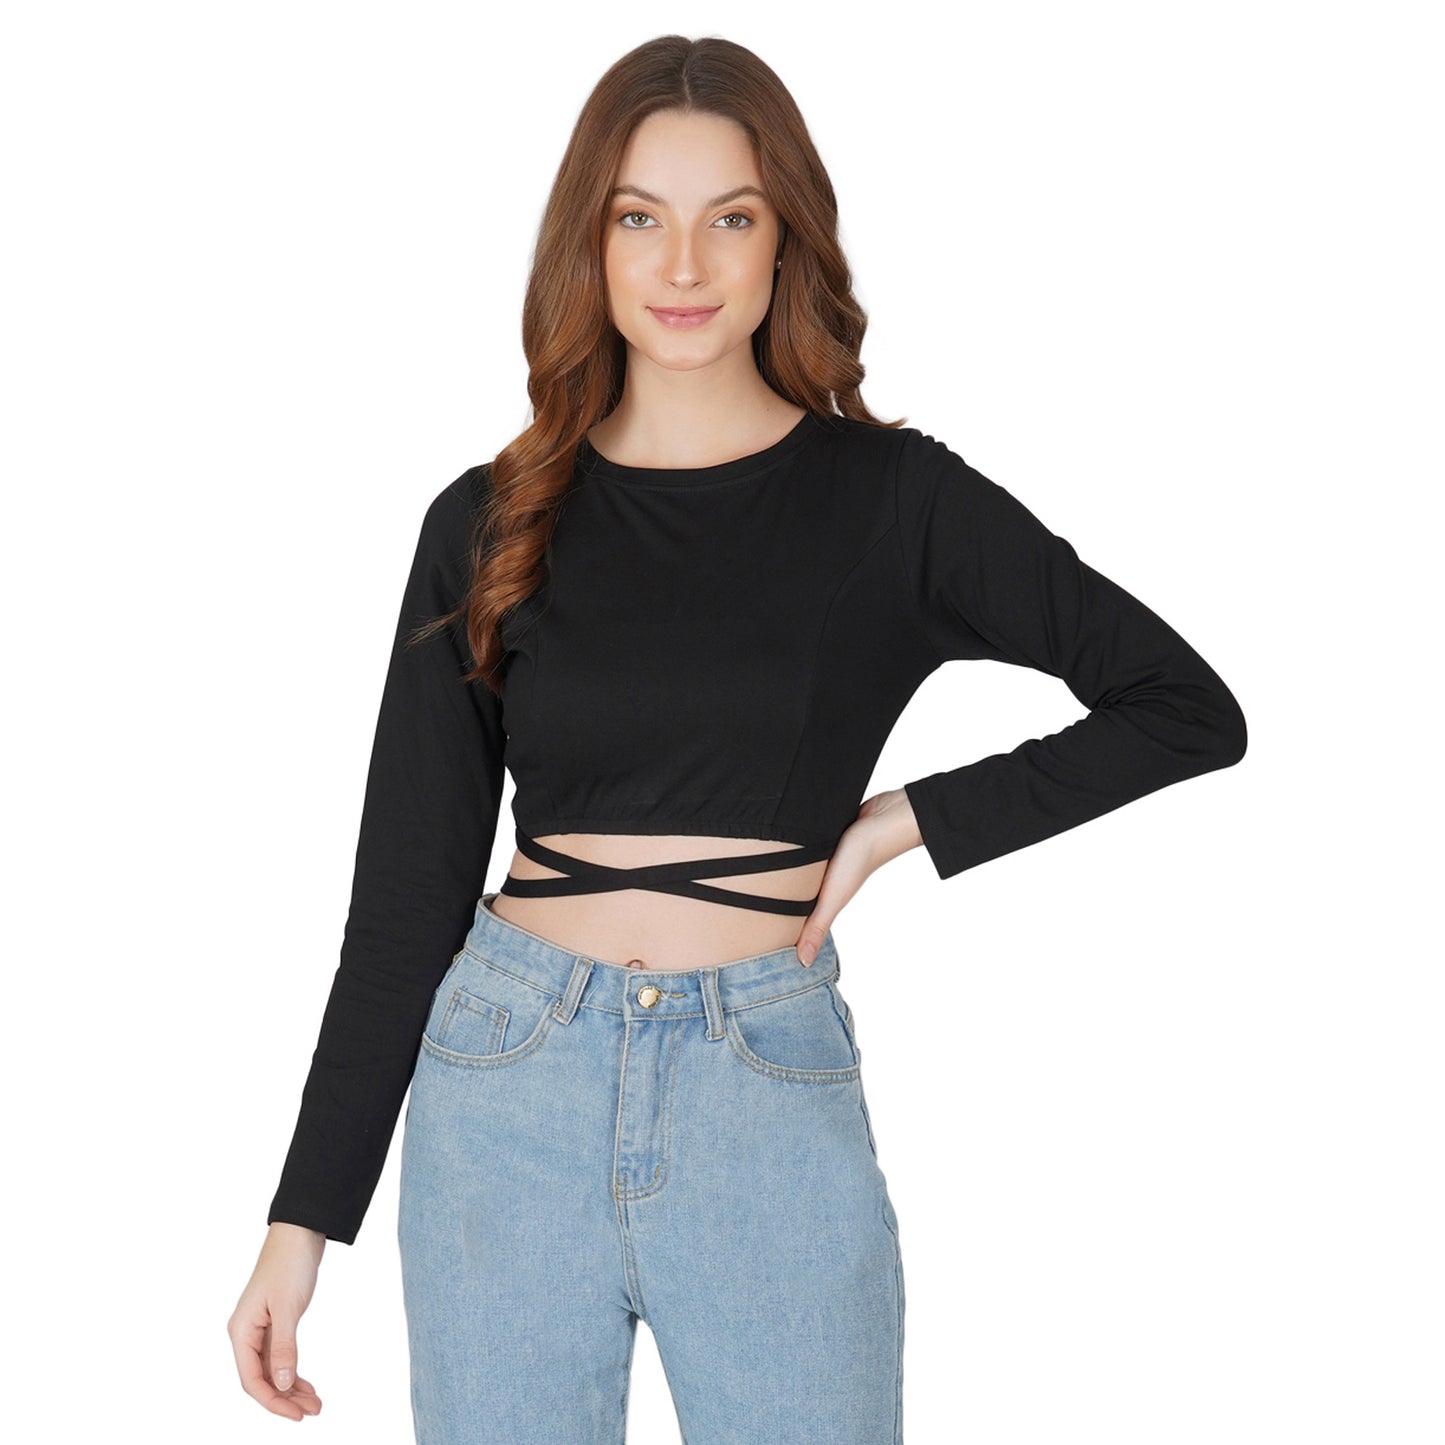 SLAY. Women's Black Full Sleeves Crop Top with Back Wrap around Strings-clothing-to-slay.myshopify.com-Crop Top